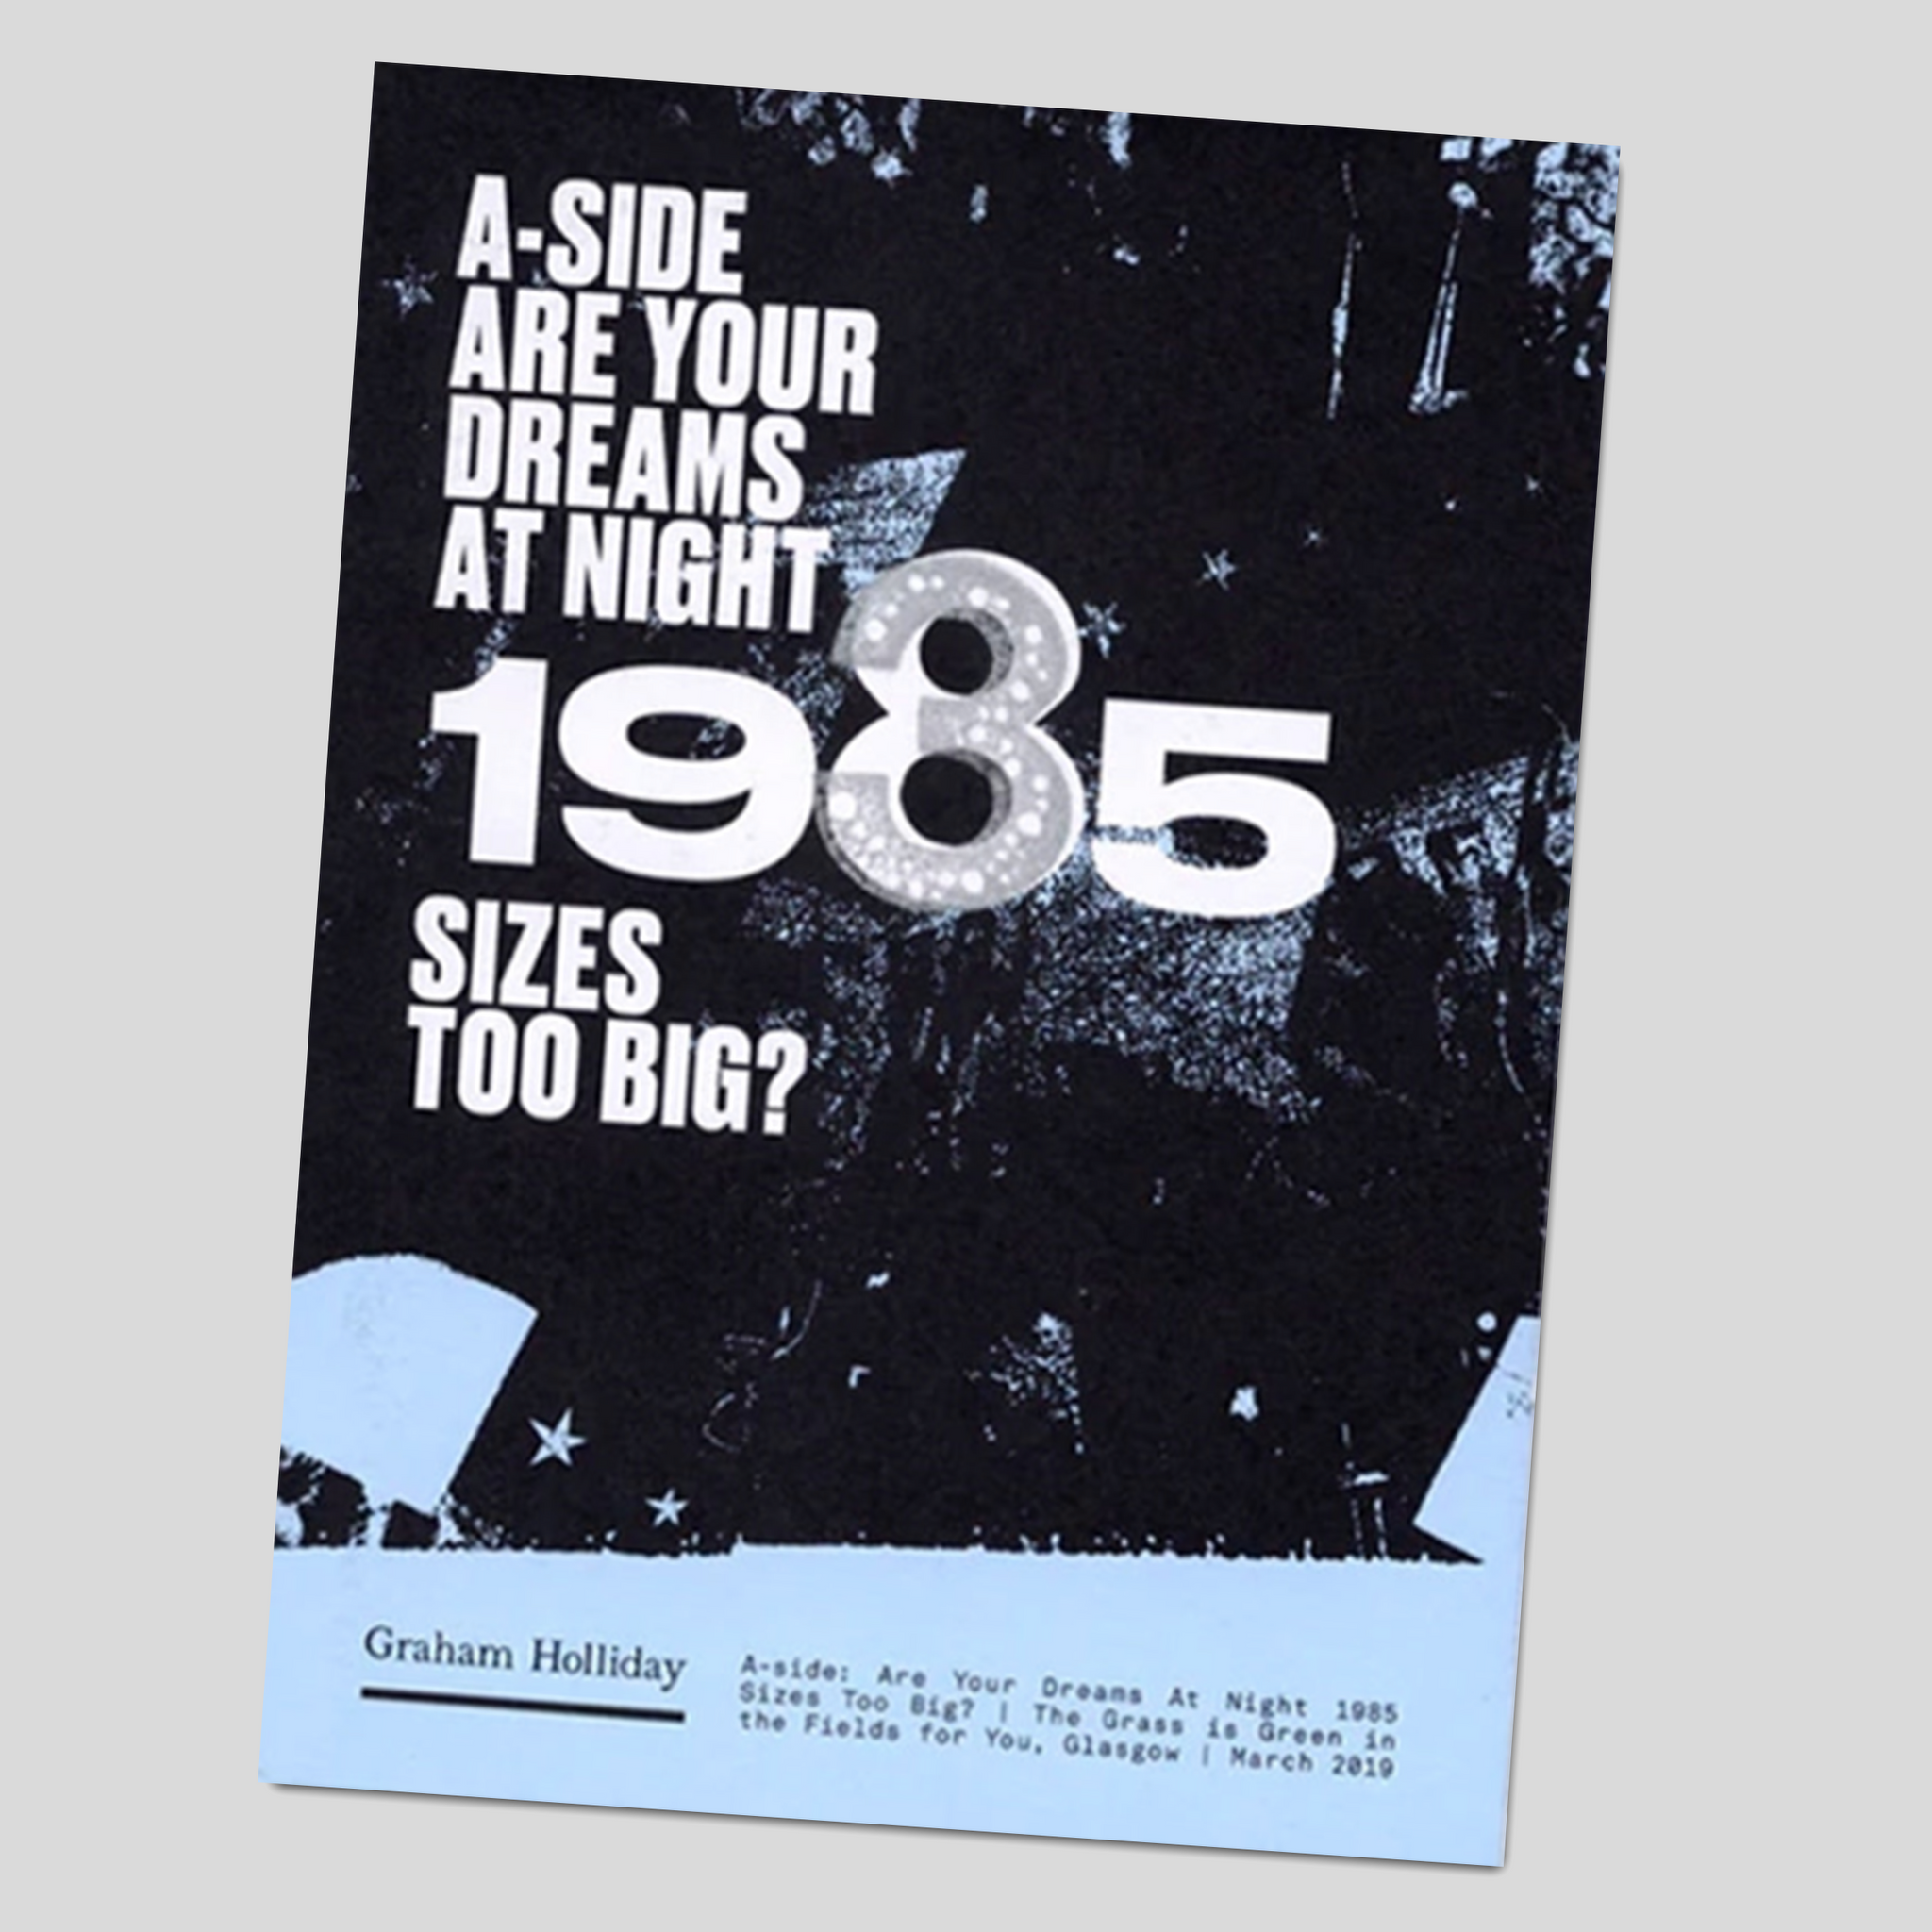 A-SIDE: ARE YOUR DREAMS AT NIGHT 1985 SIZES TOO BIG? - Graham Holliday